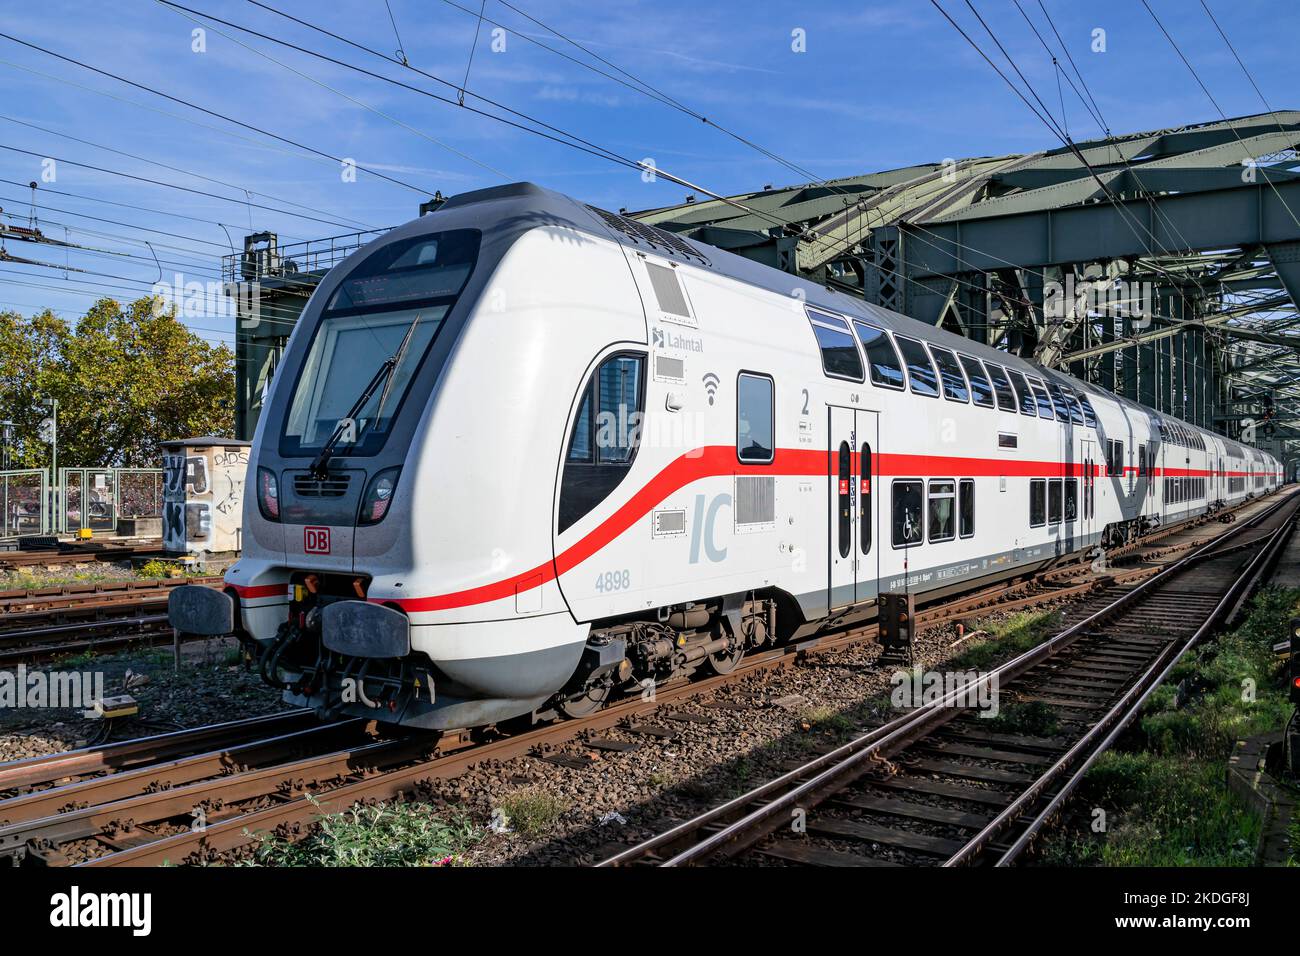 DB Intercity 2 train on the Hohenzollern Bridge in Cologne, Germany Stock Photo